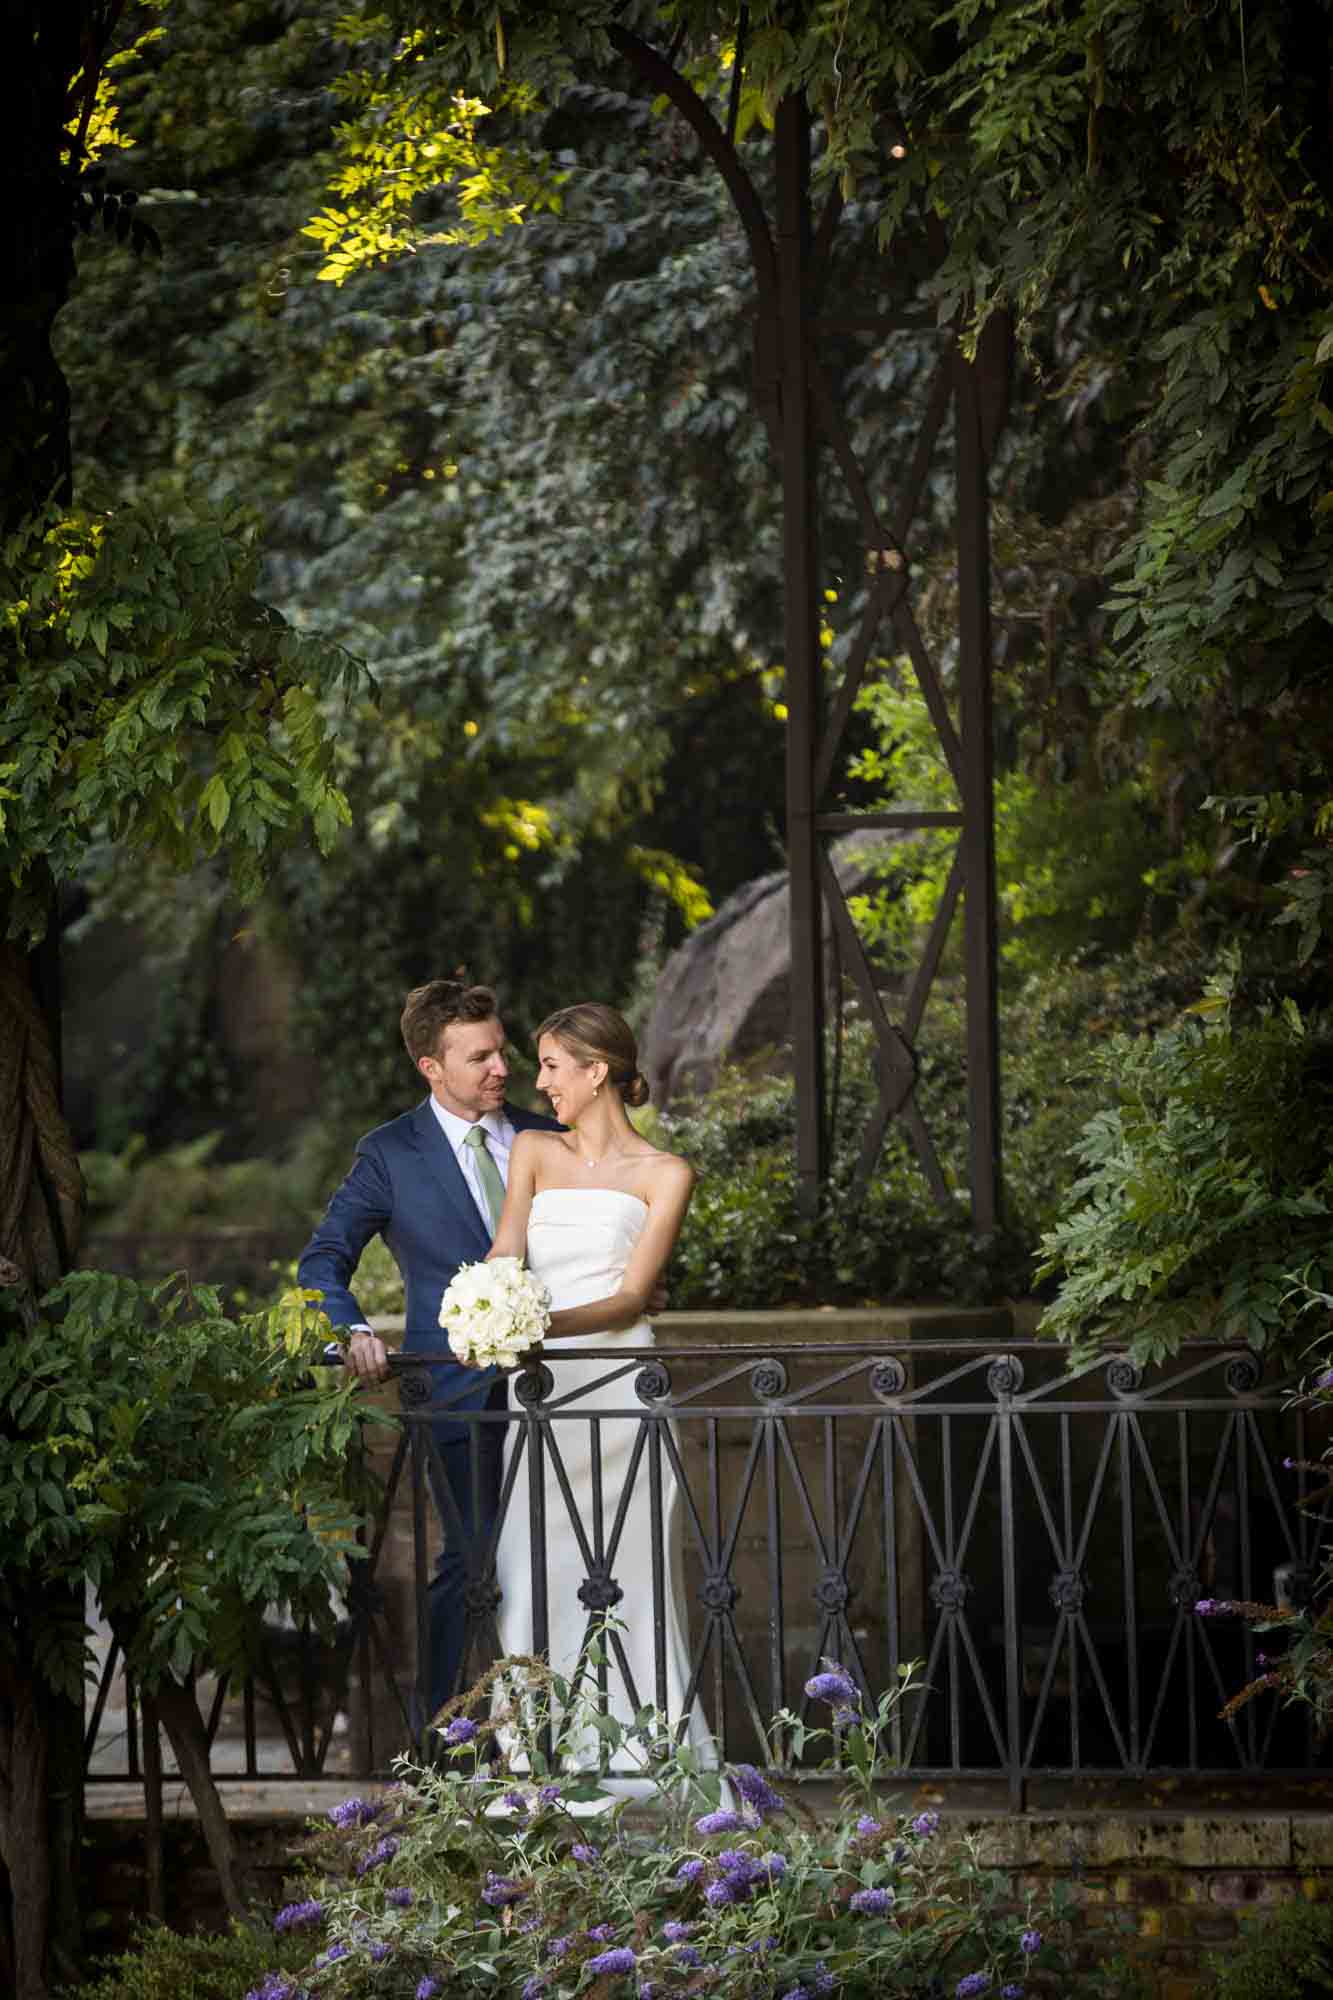 Couple standing by railing along Wisteria Terrace during a Conservatory Garden wedding in Central Park